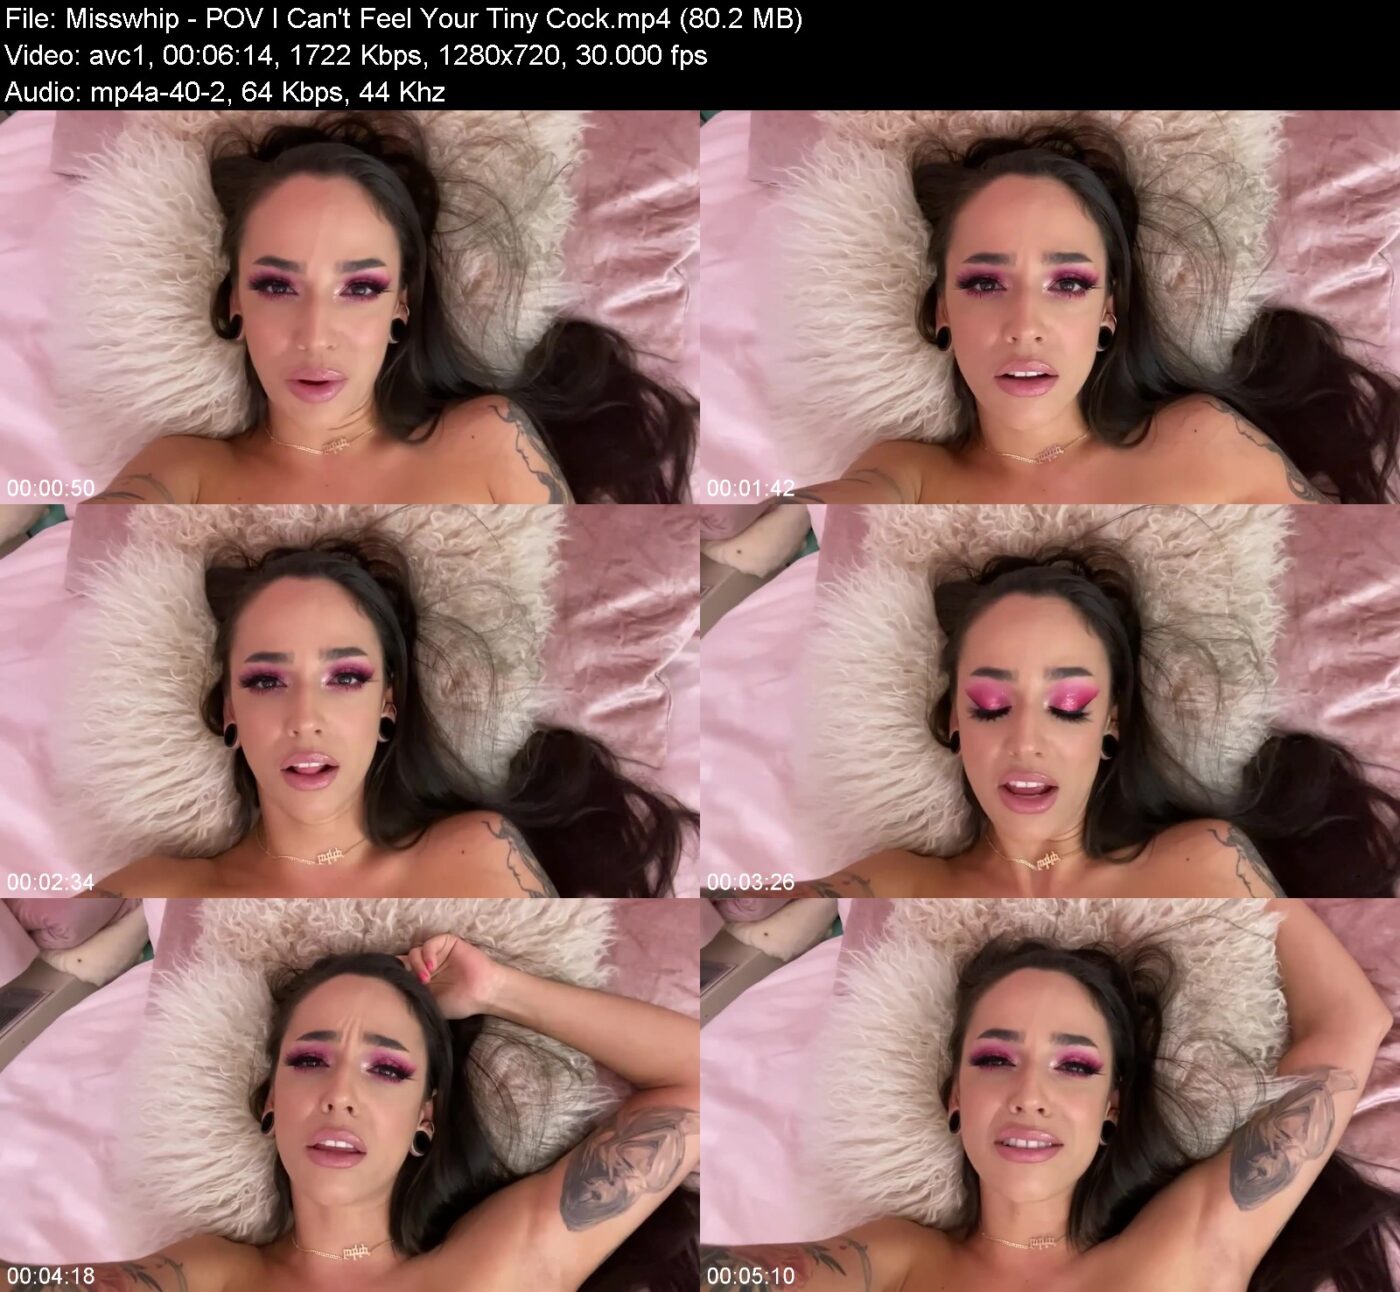 Actress: Misswhip. Title and Studio: POV I Can’t Feel Your Tiny Cock